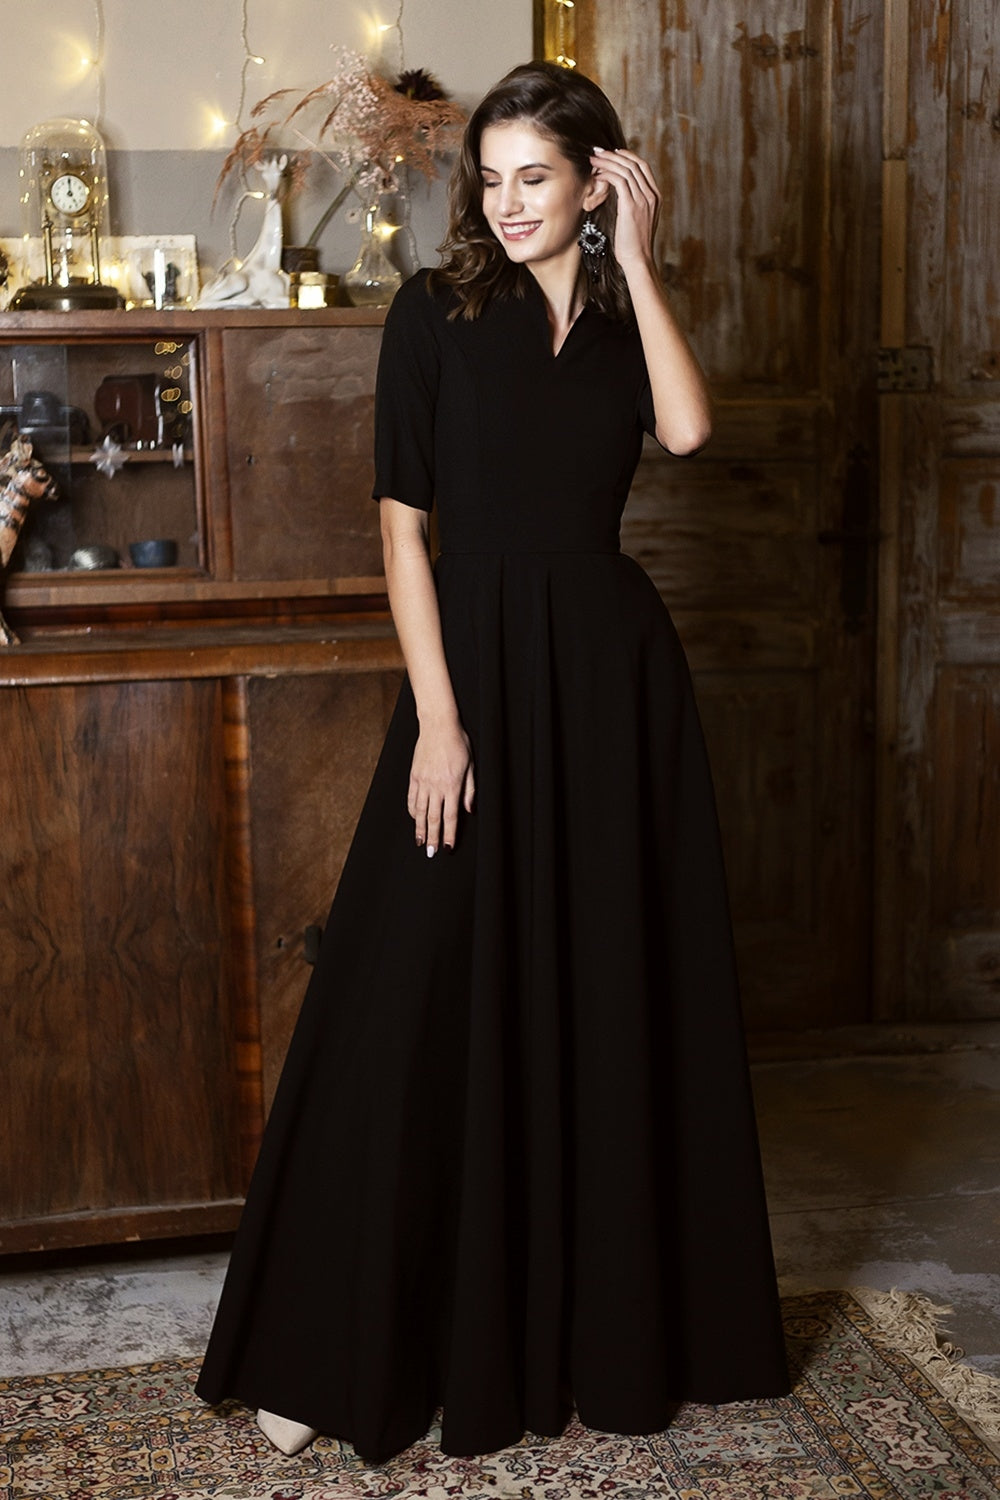 Maxi dress with circle skirt and separated belt